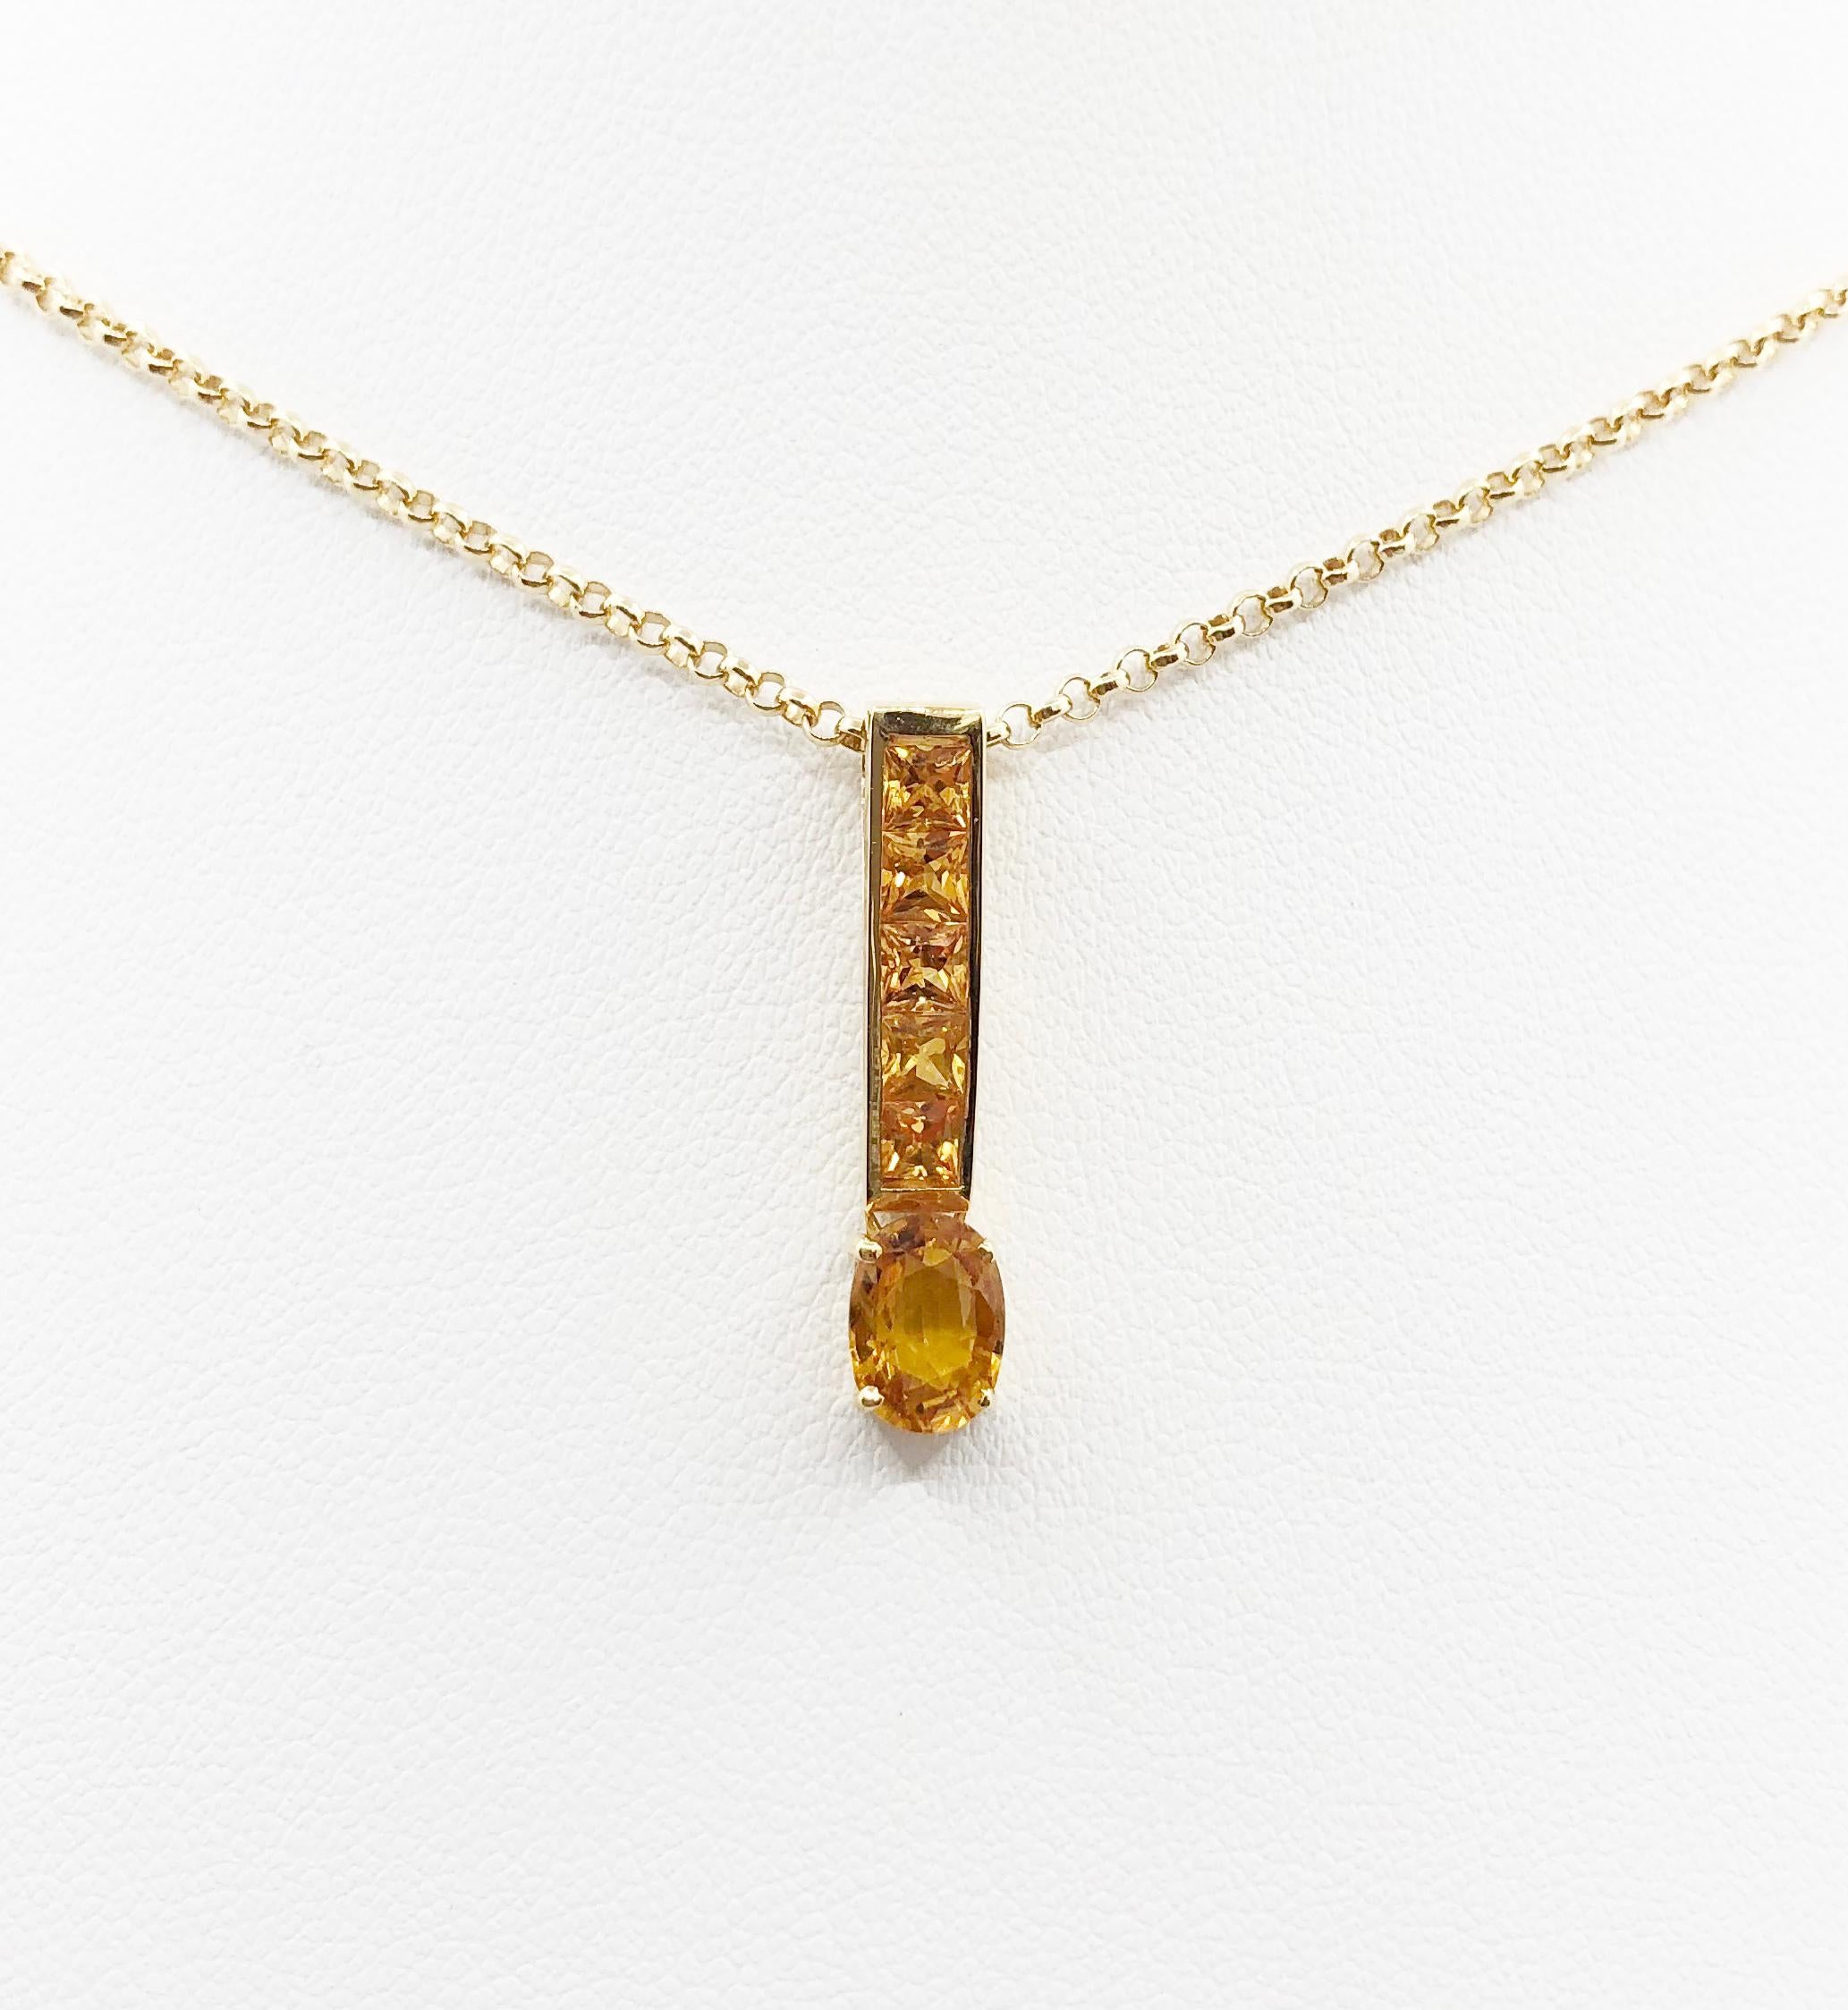 Yellow Sapphire 1.17 carats with Yellow Sapphire 0.90 carat Pendant set in 18 Karat Gold Settings
(chain not included)

Width: 0.5 cm 
Length: 2.5 cm
Total Weight: 2.32 grams

